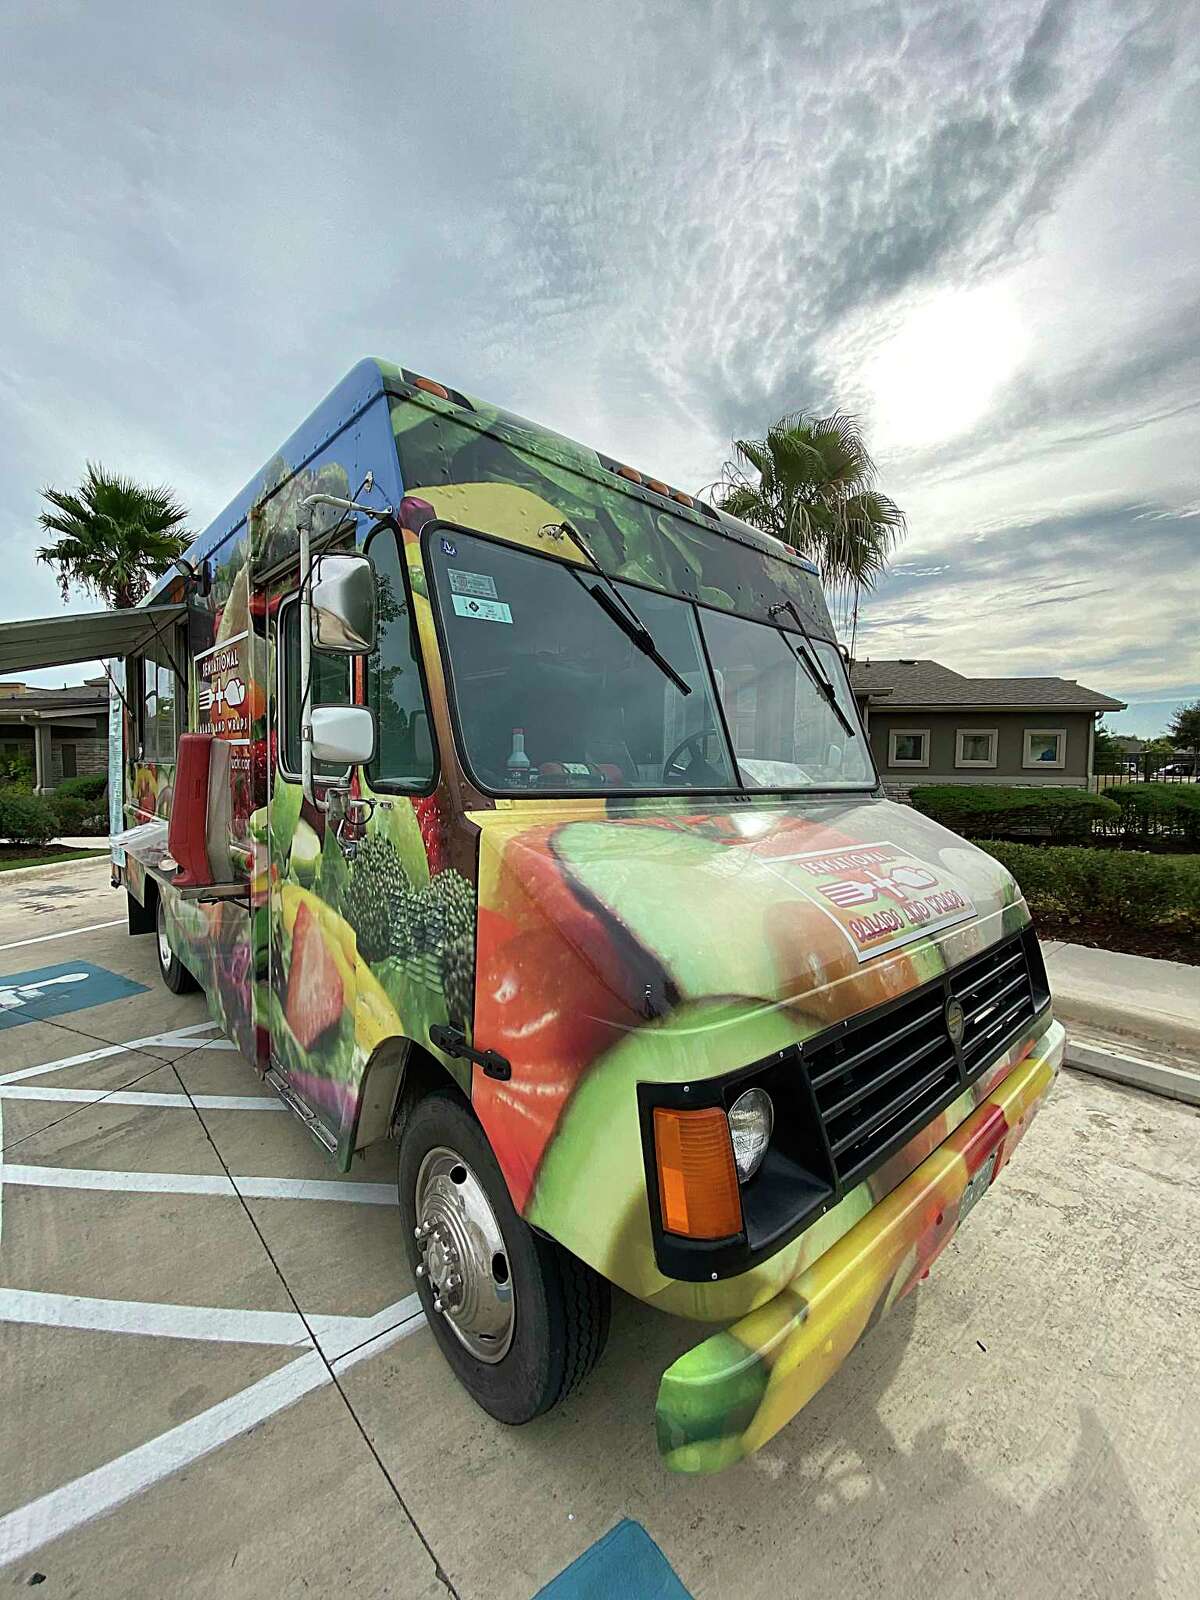 The Sensational Salads and Wraps truck has been serving San Antonio since 2012. From tacos to barbecue to sandwiches and beyond, the San Antonio food truck scene will take center stage for the Express-News' 52 Weeks of Food Trucks series in 2021.